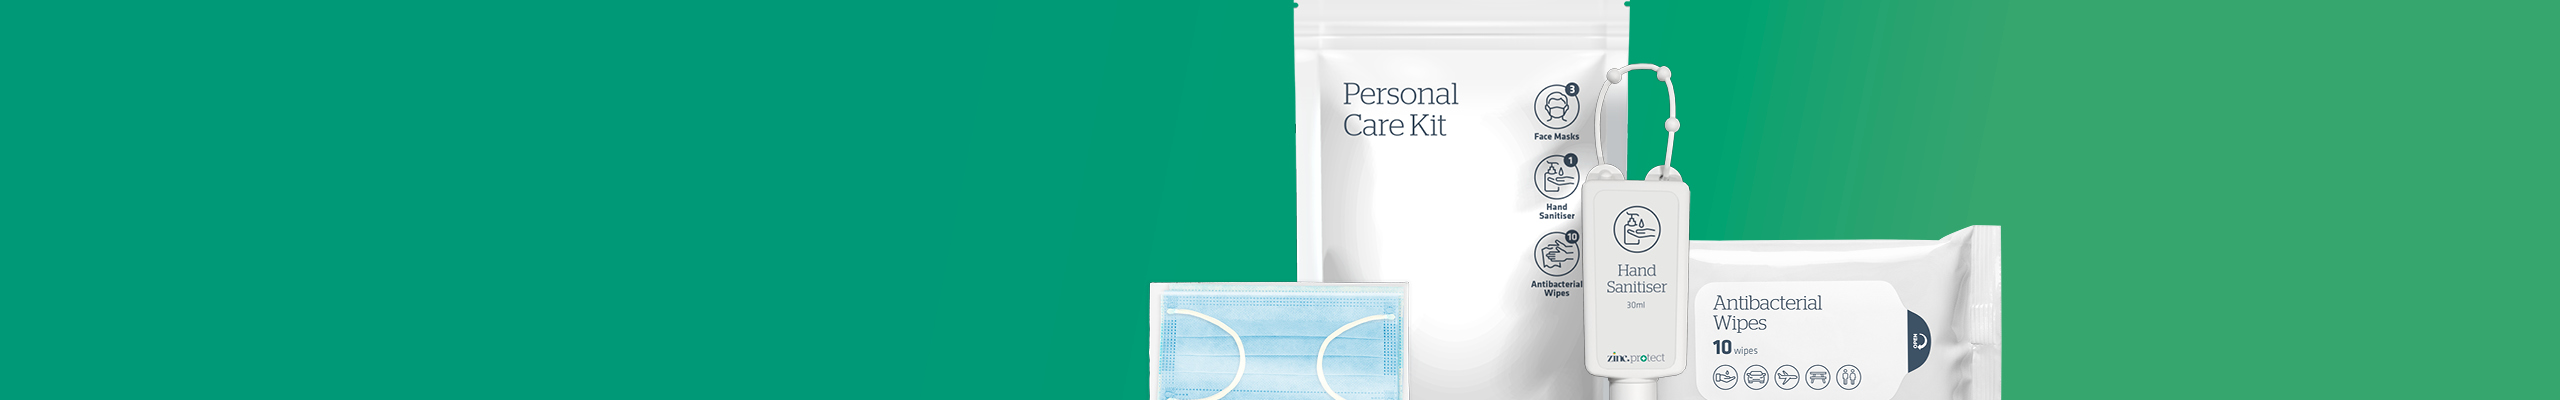 Personal Care Kit B